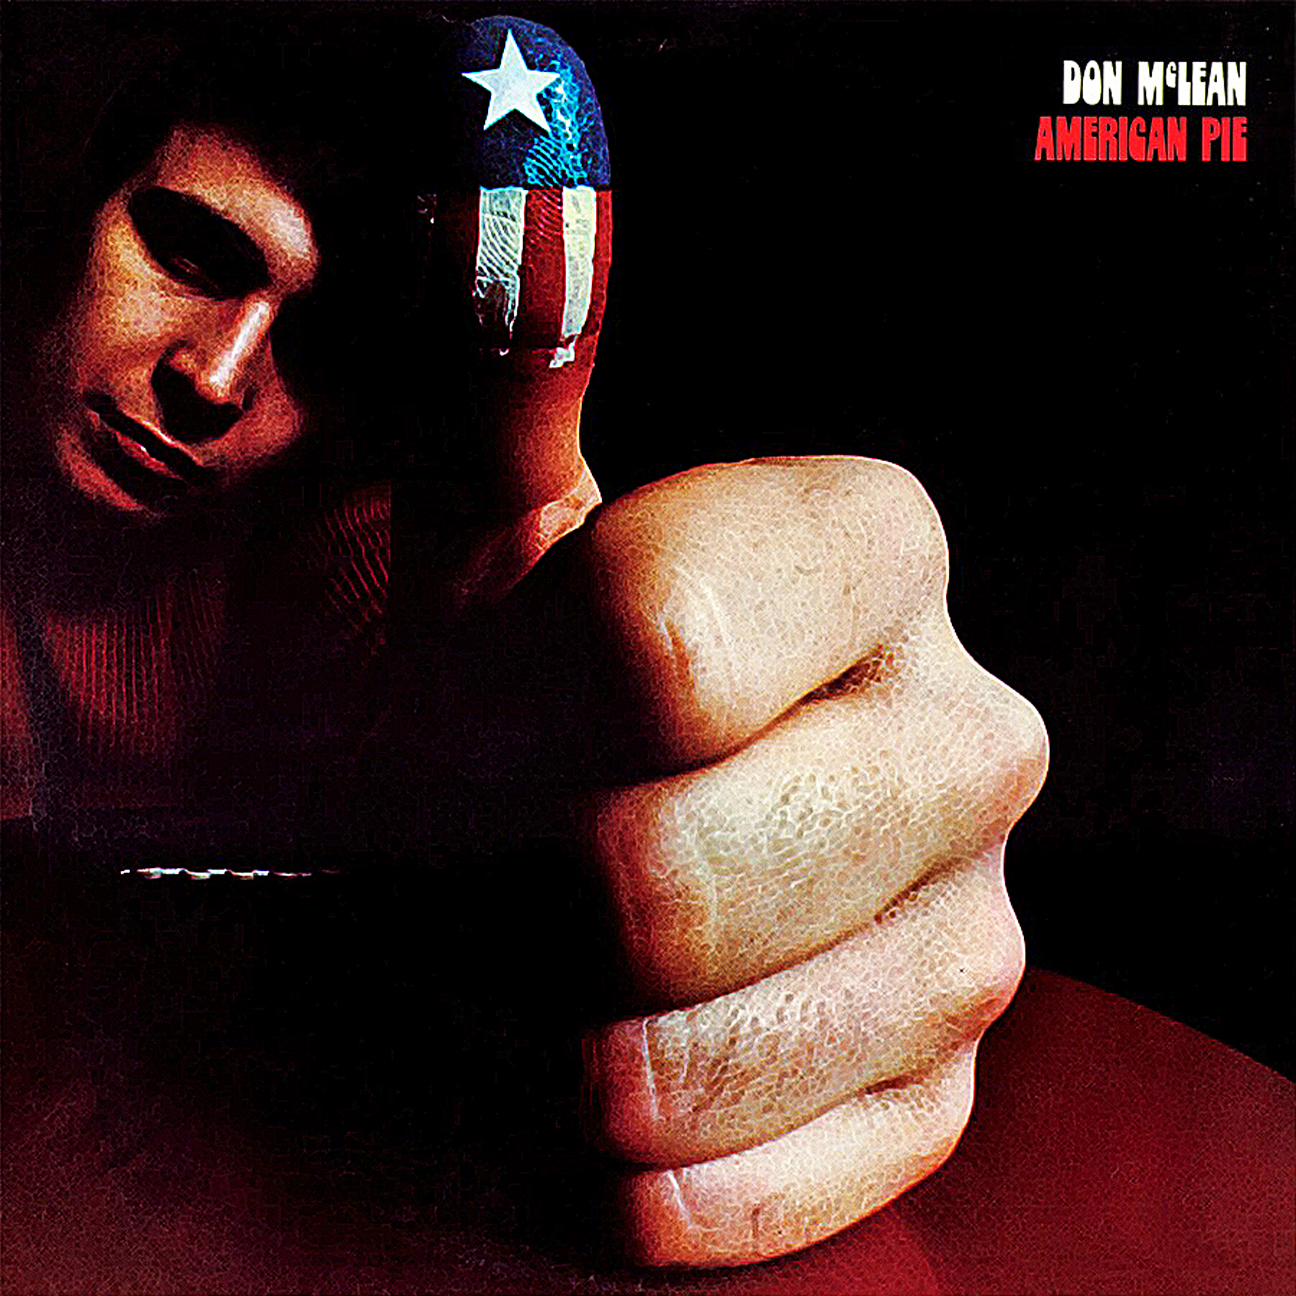 Deviations from Select Albums 1: 24. Don McLean - American Pie